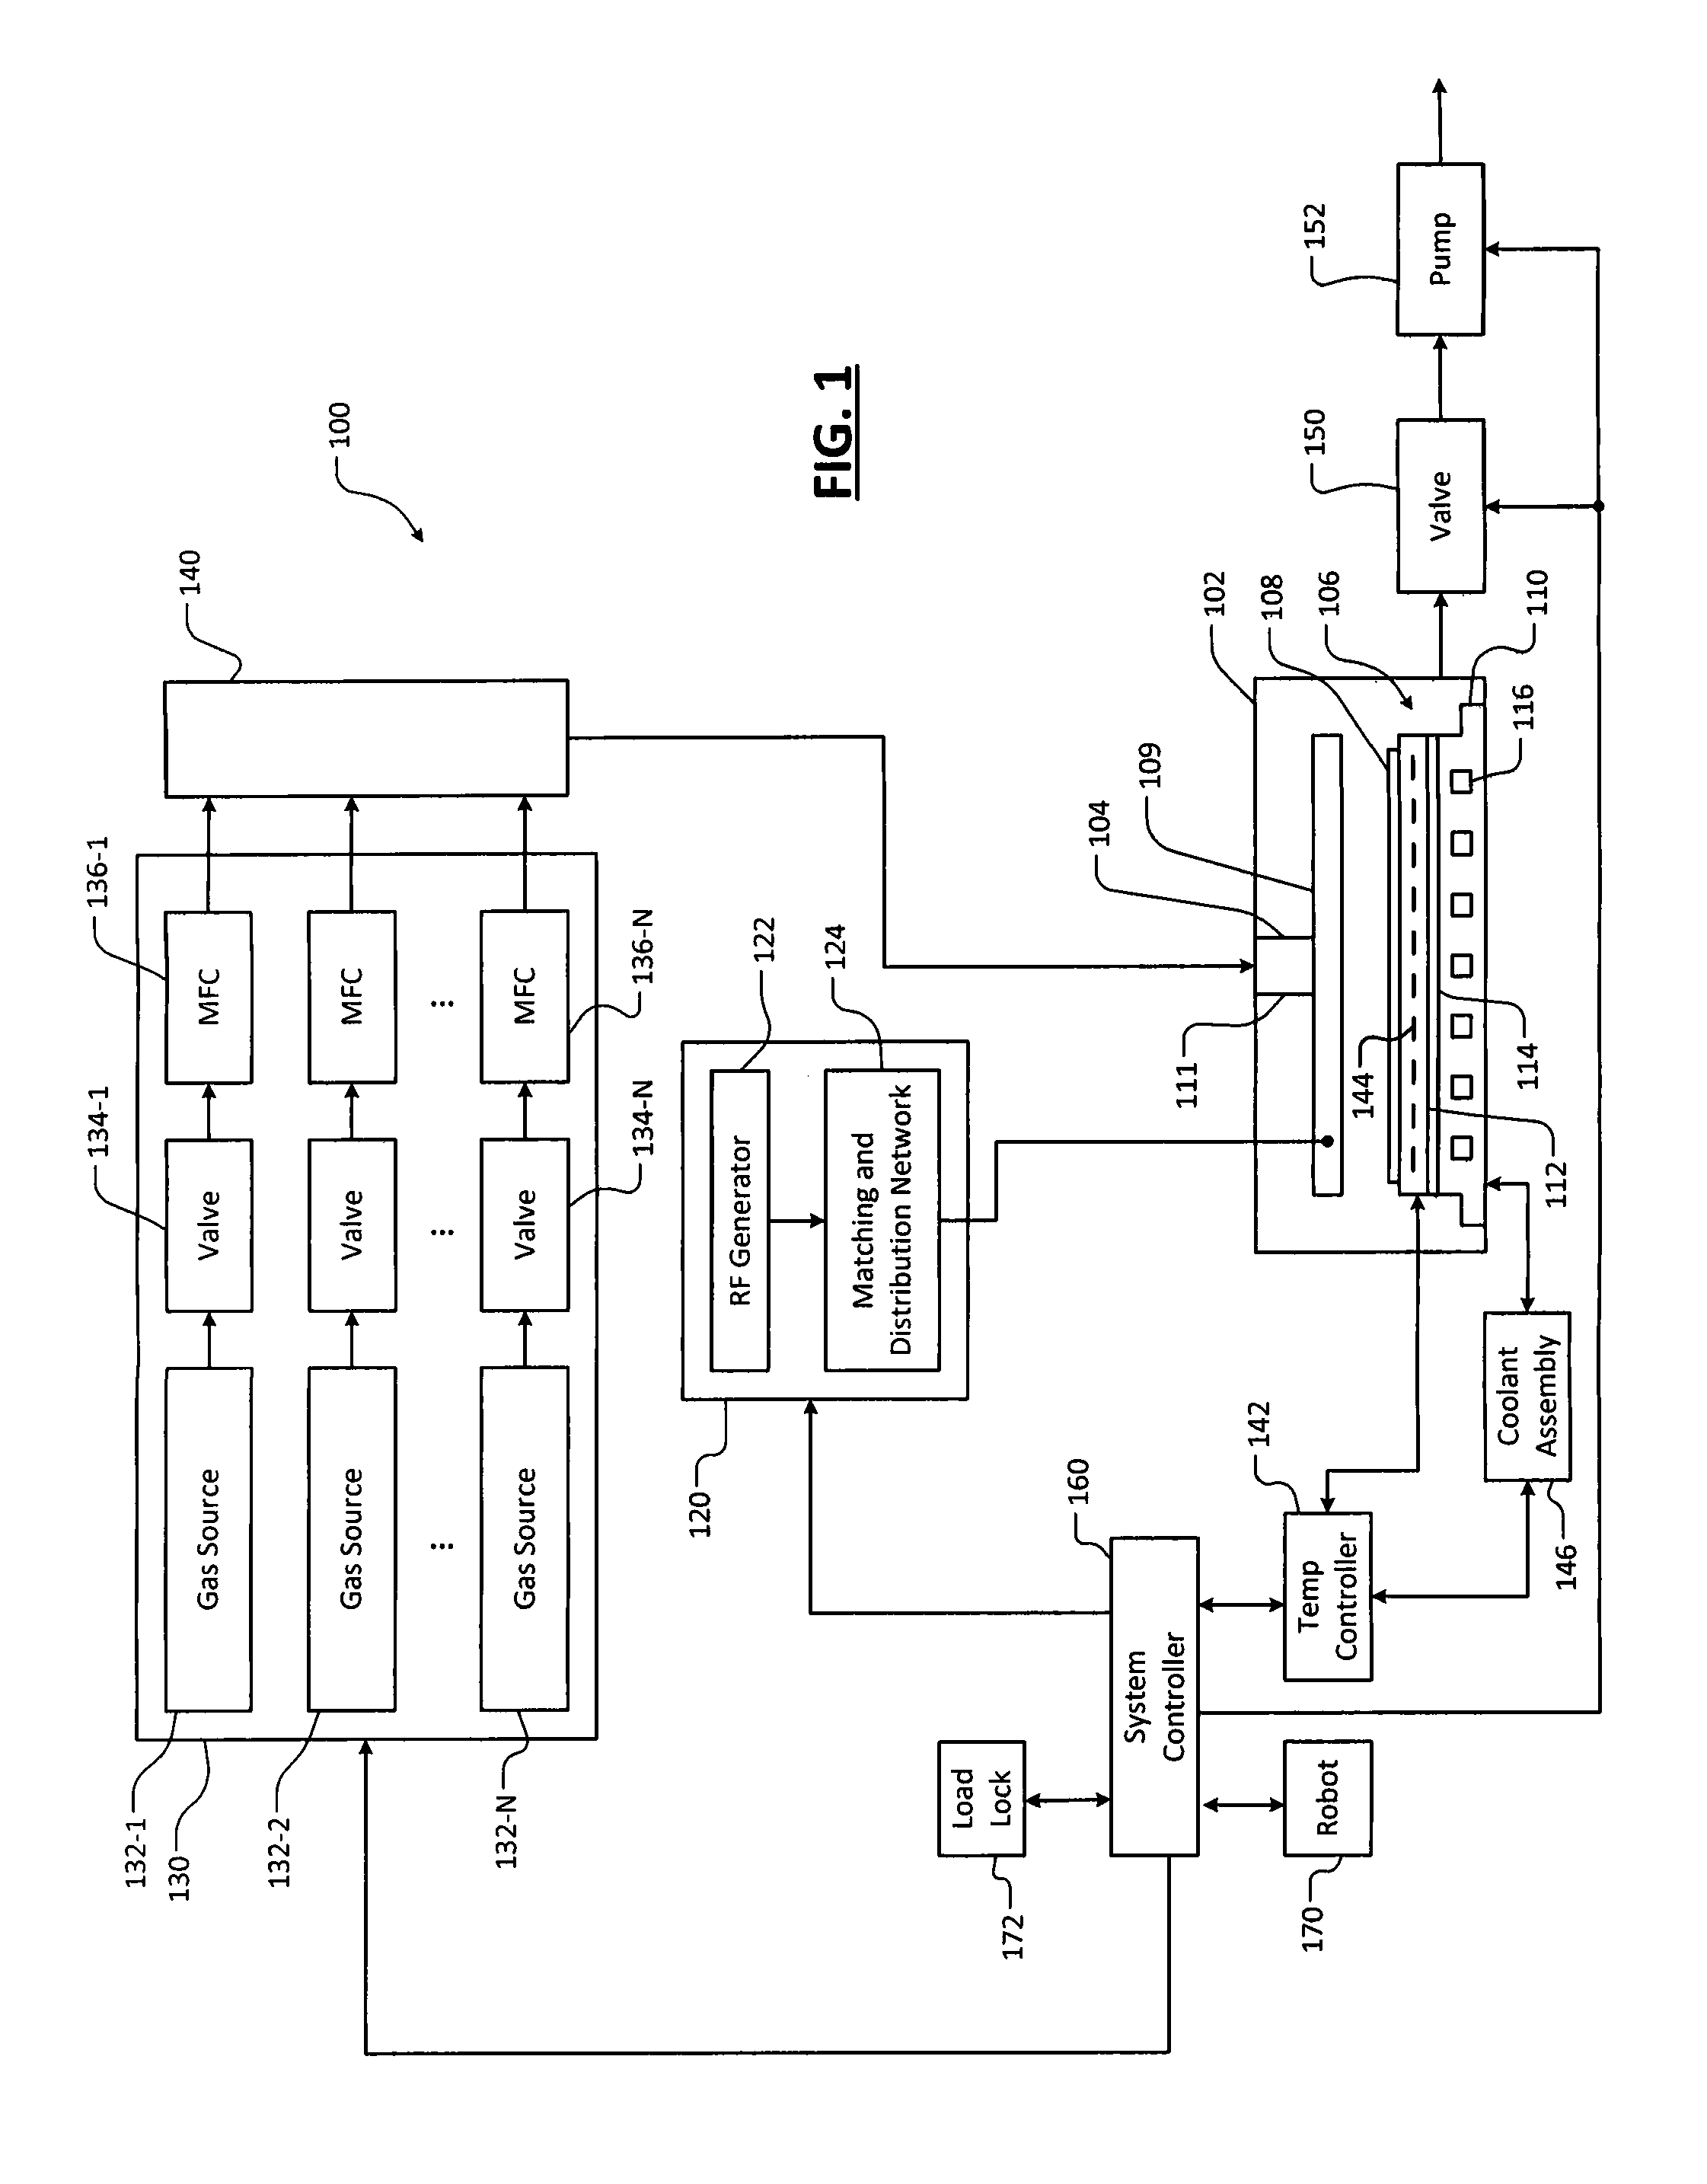 Systems and methods for calibrating scalar field contribution values for a limited number of sensors including a temperature value of an electrostatic chuck and estimating temperature distribution profiles based on calibrated values